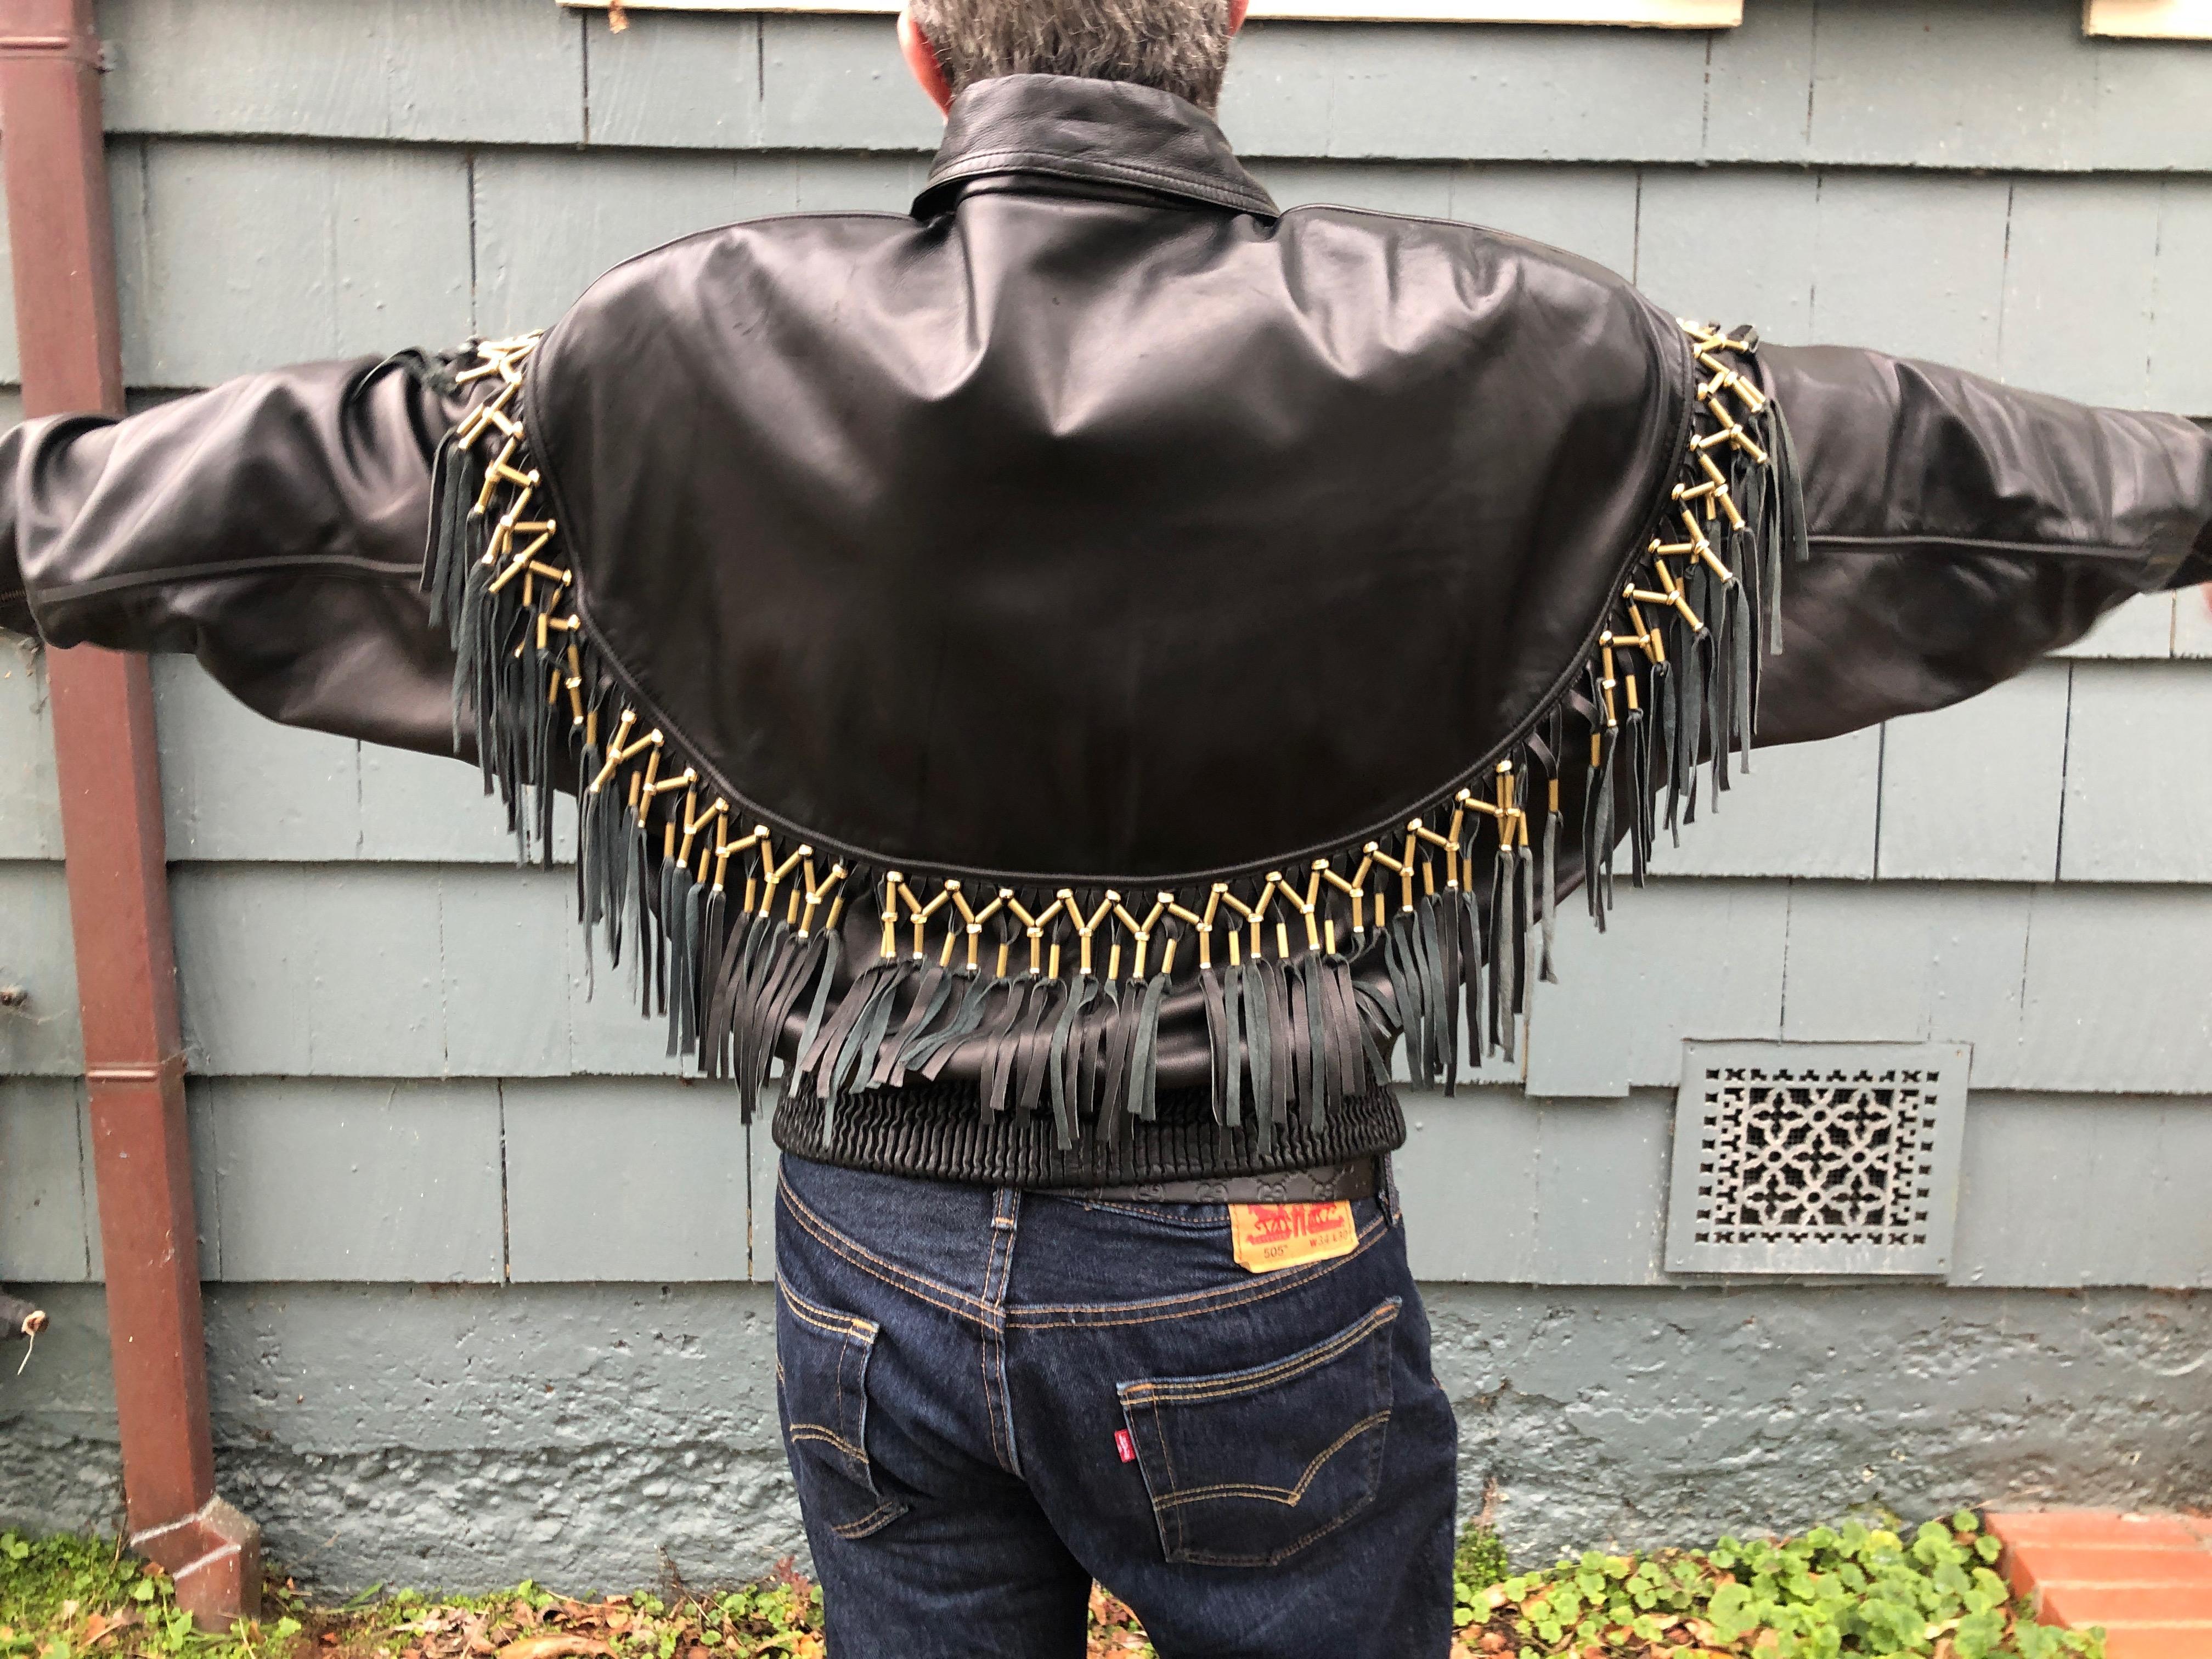 Gianni Versace 1984 Lambskin Leather Men's Jacket with Beaded Fringe In Good Condition For Sale In Cloverdale, CA